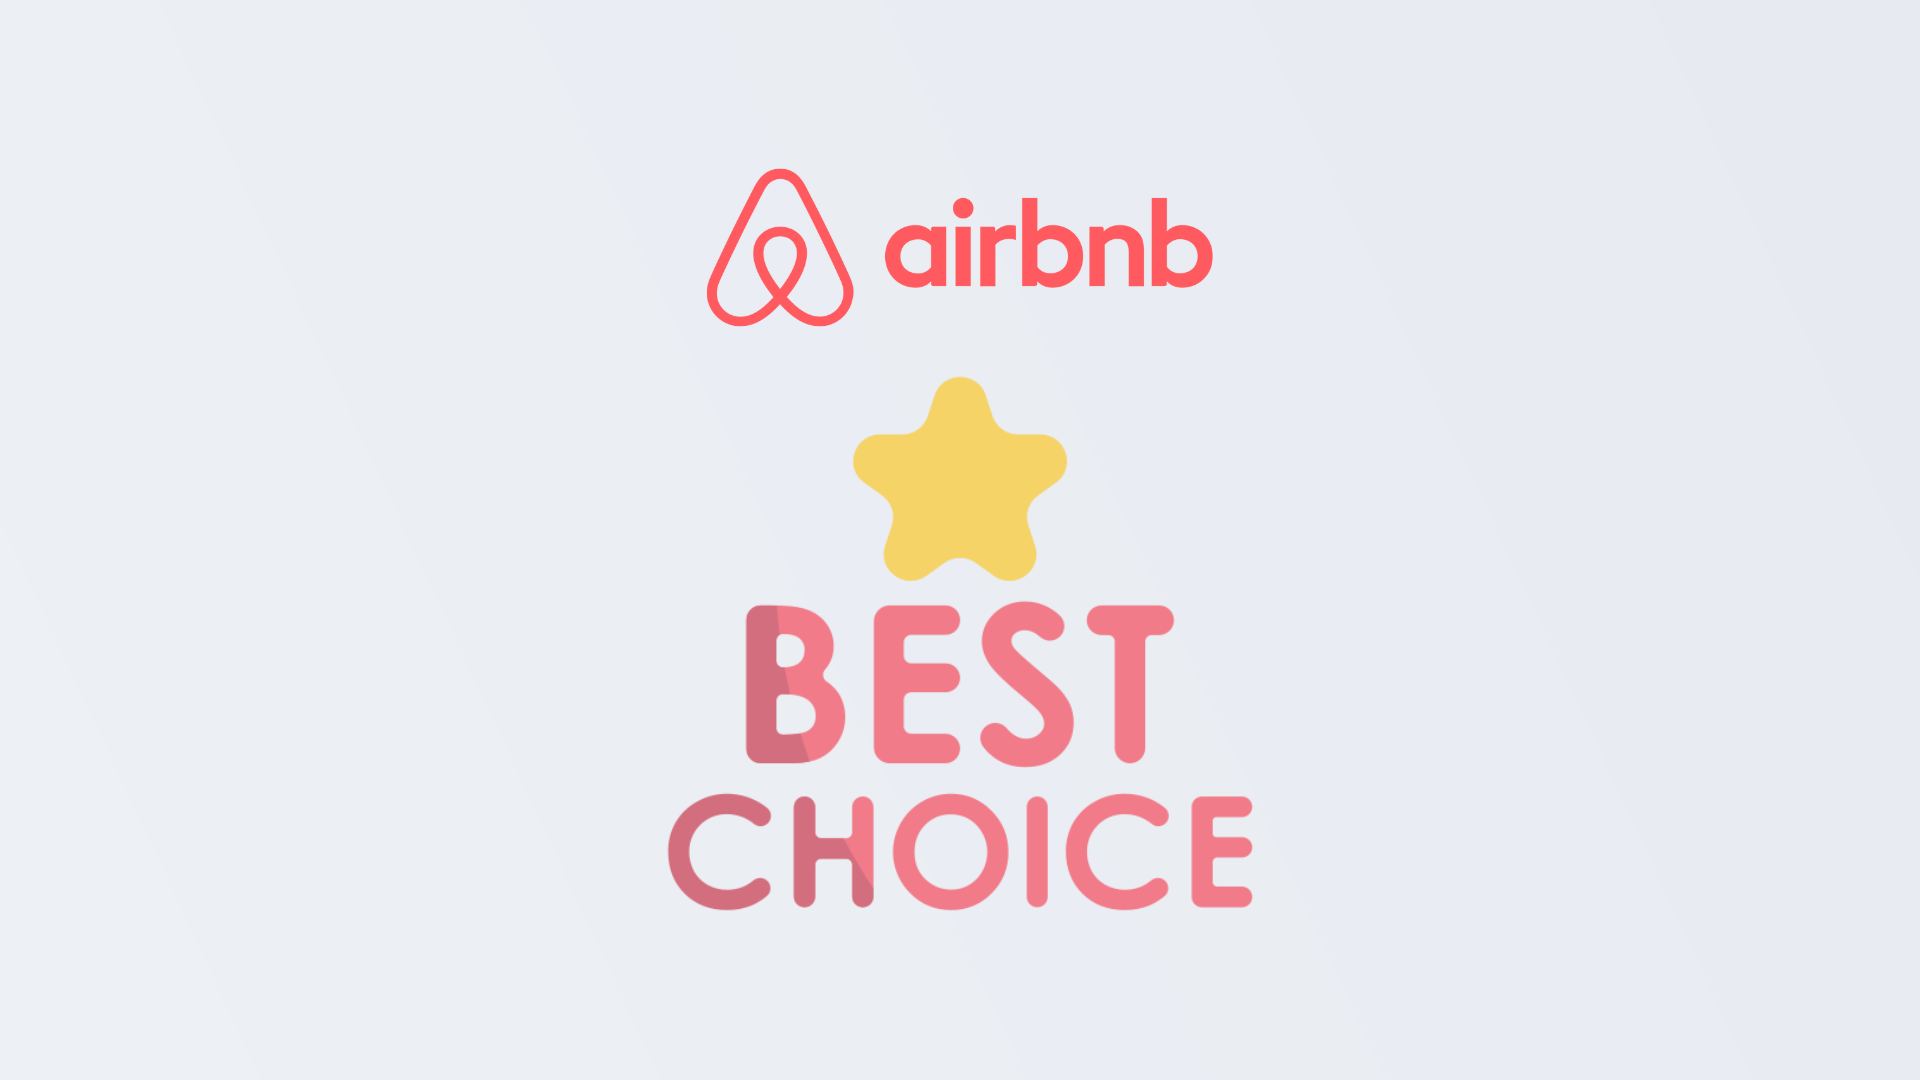 How to optimise your Airbnb profile (and get more reviews!)